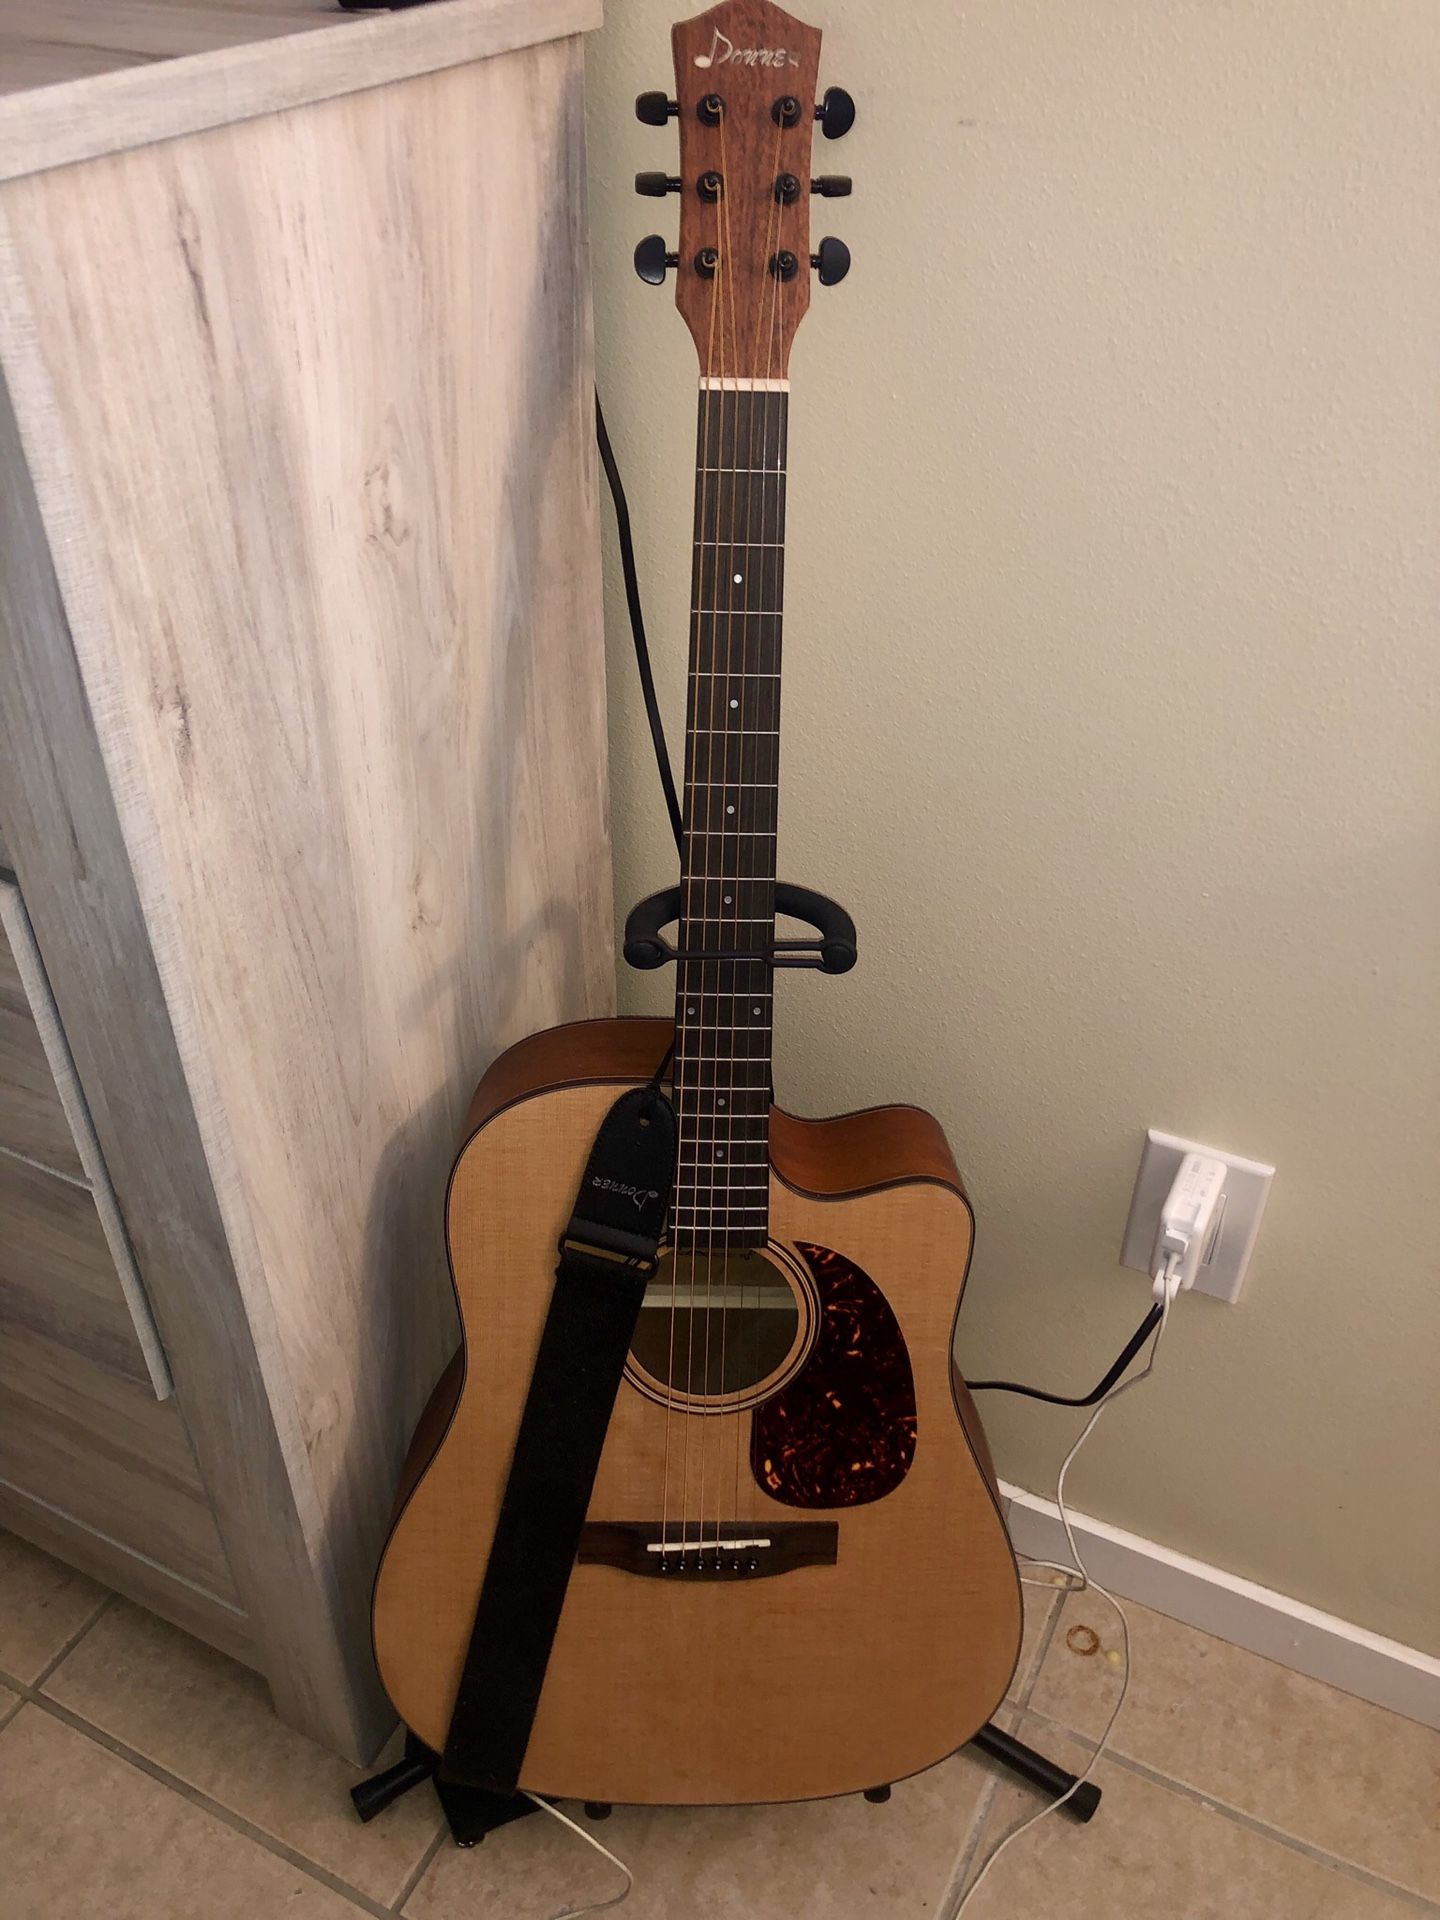 Donner Acoustic guitar, never played